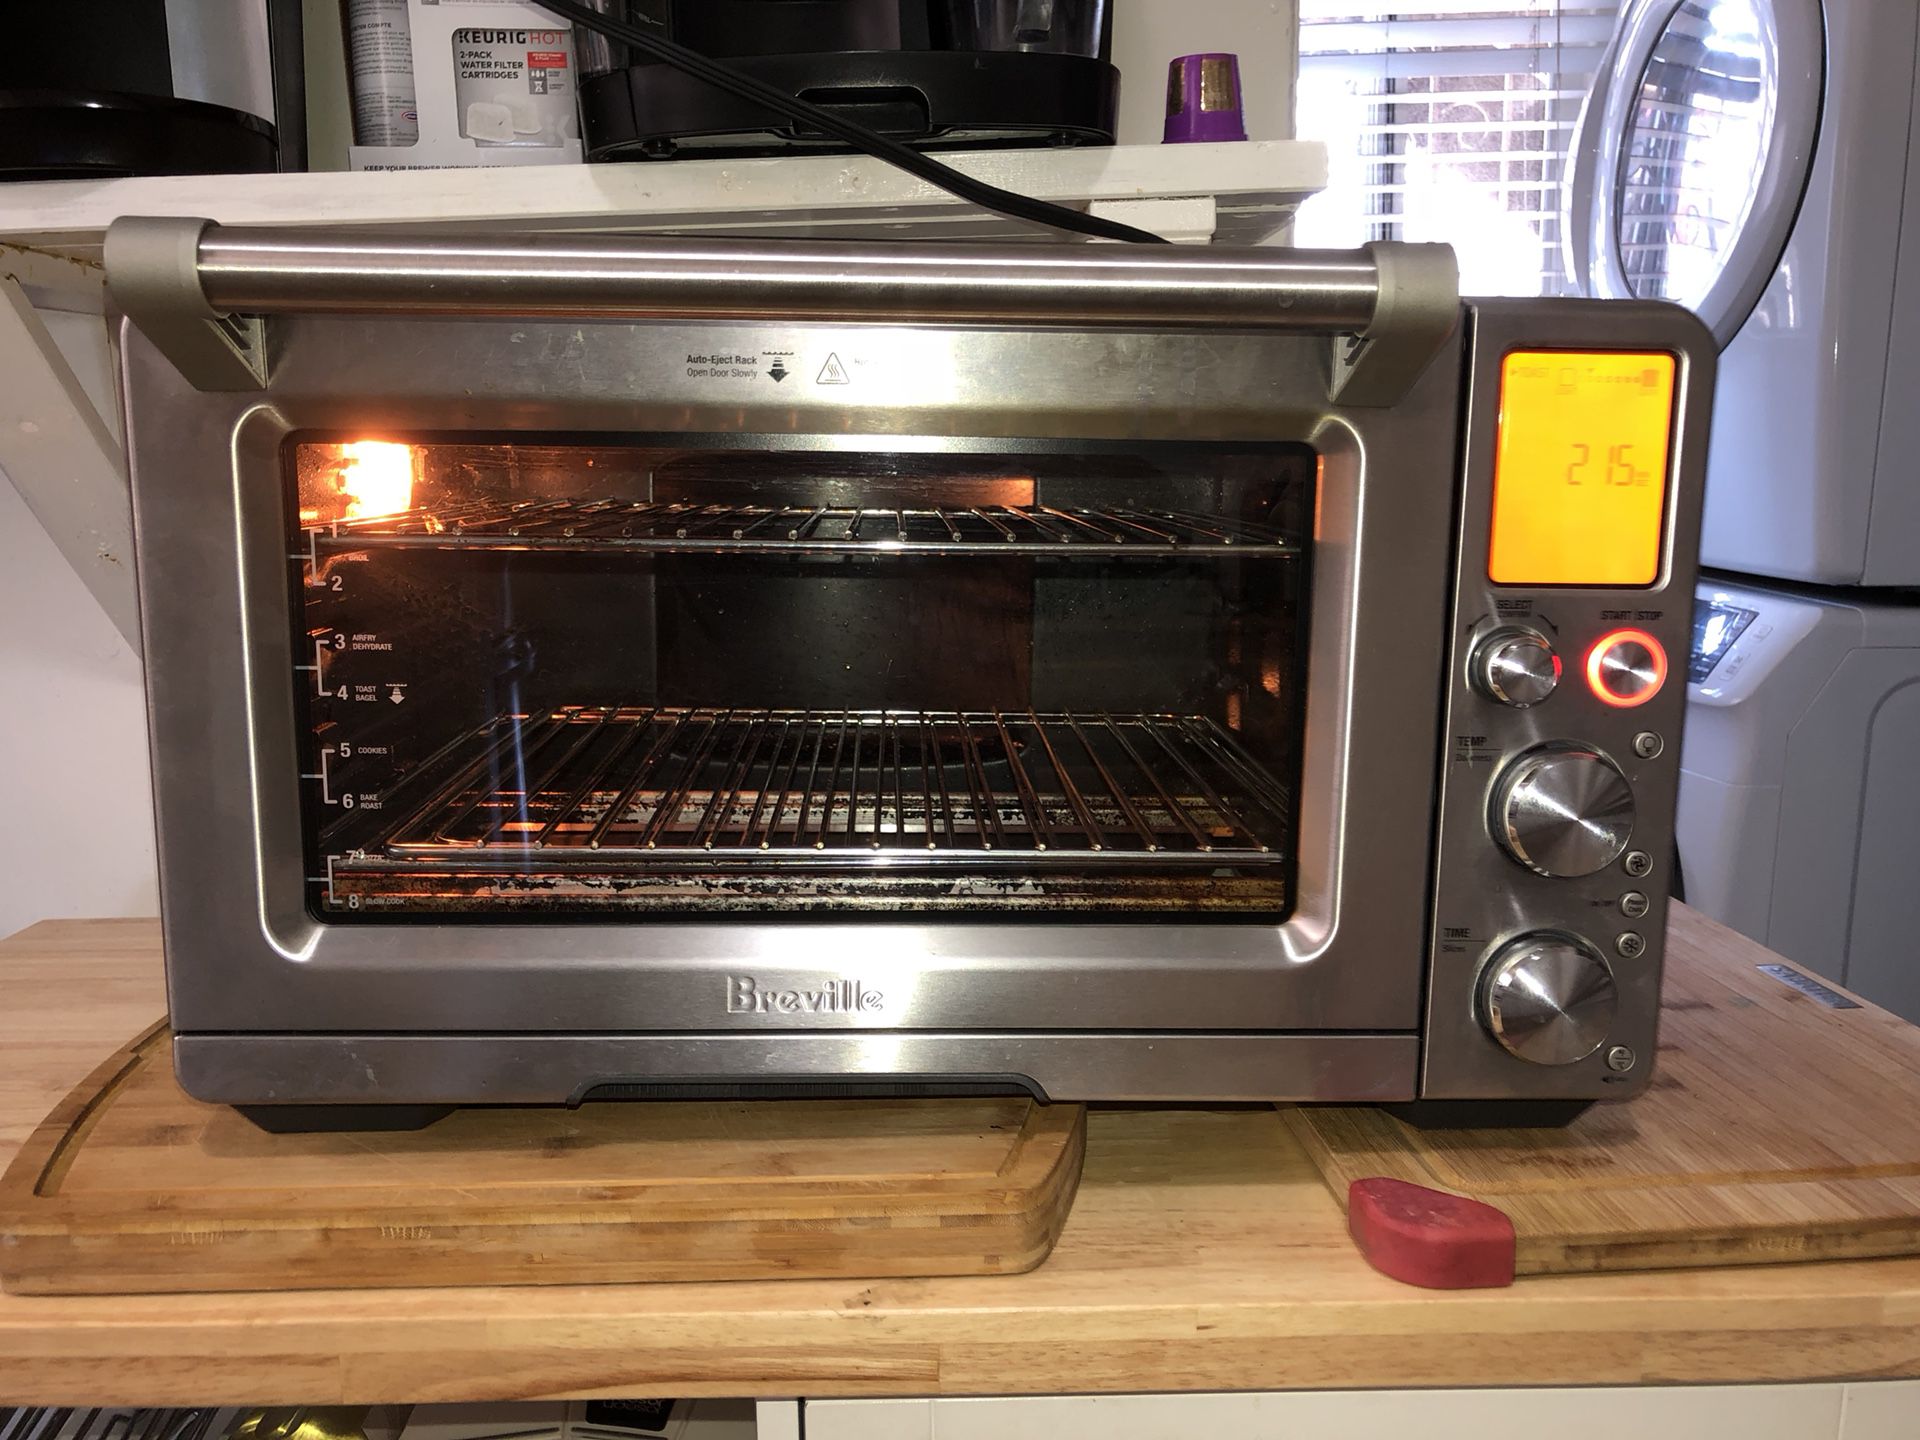 Breville Joule Oven Air Fryer Pro BOV950 for Sale in West Hollywood, CA -  OfferUp